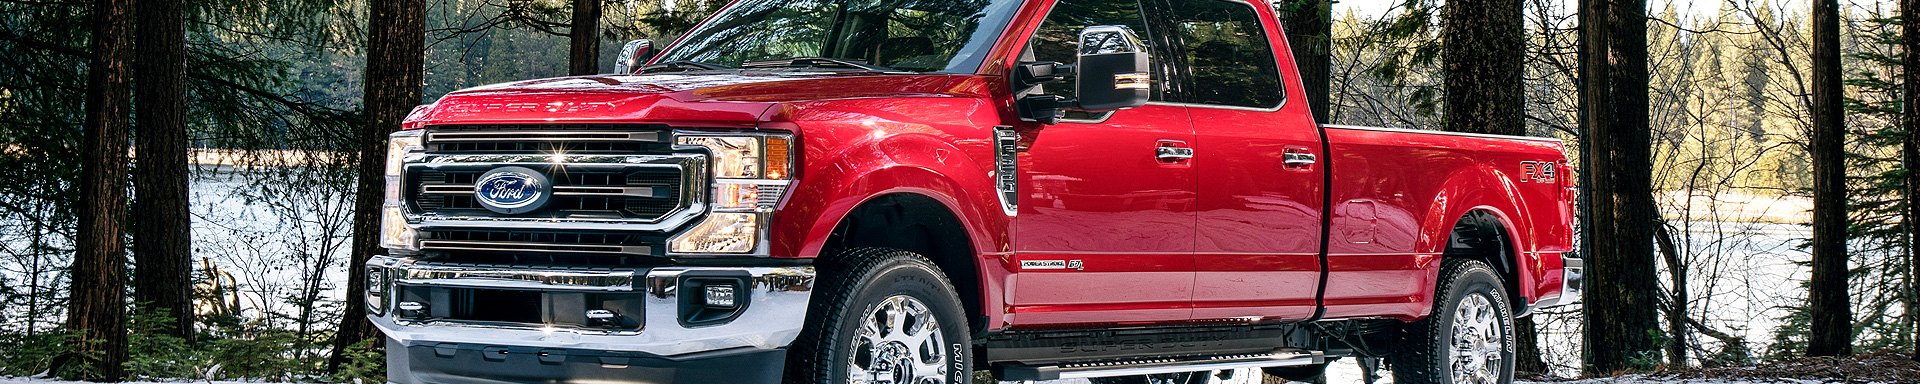 4 Pickup Mods That Give a 1500 Series Pickup the Stature of a Heavy-Duty One